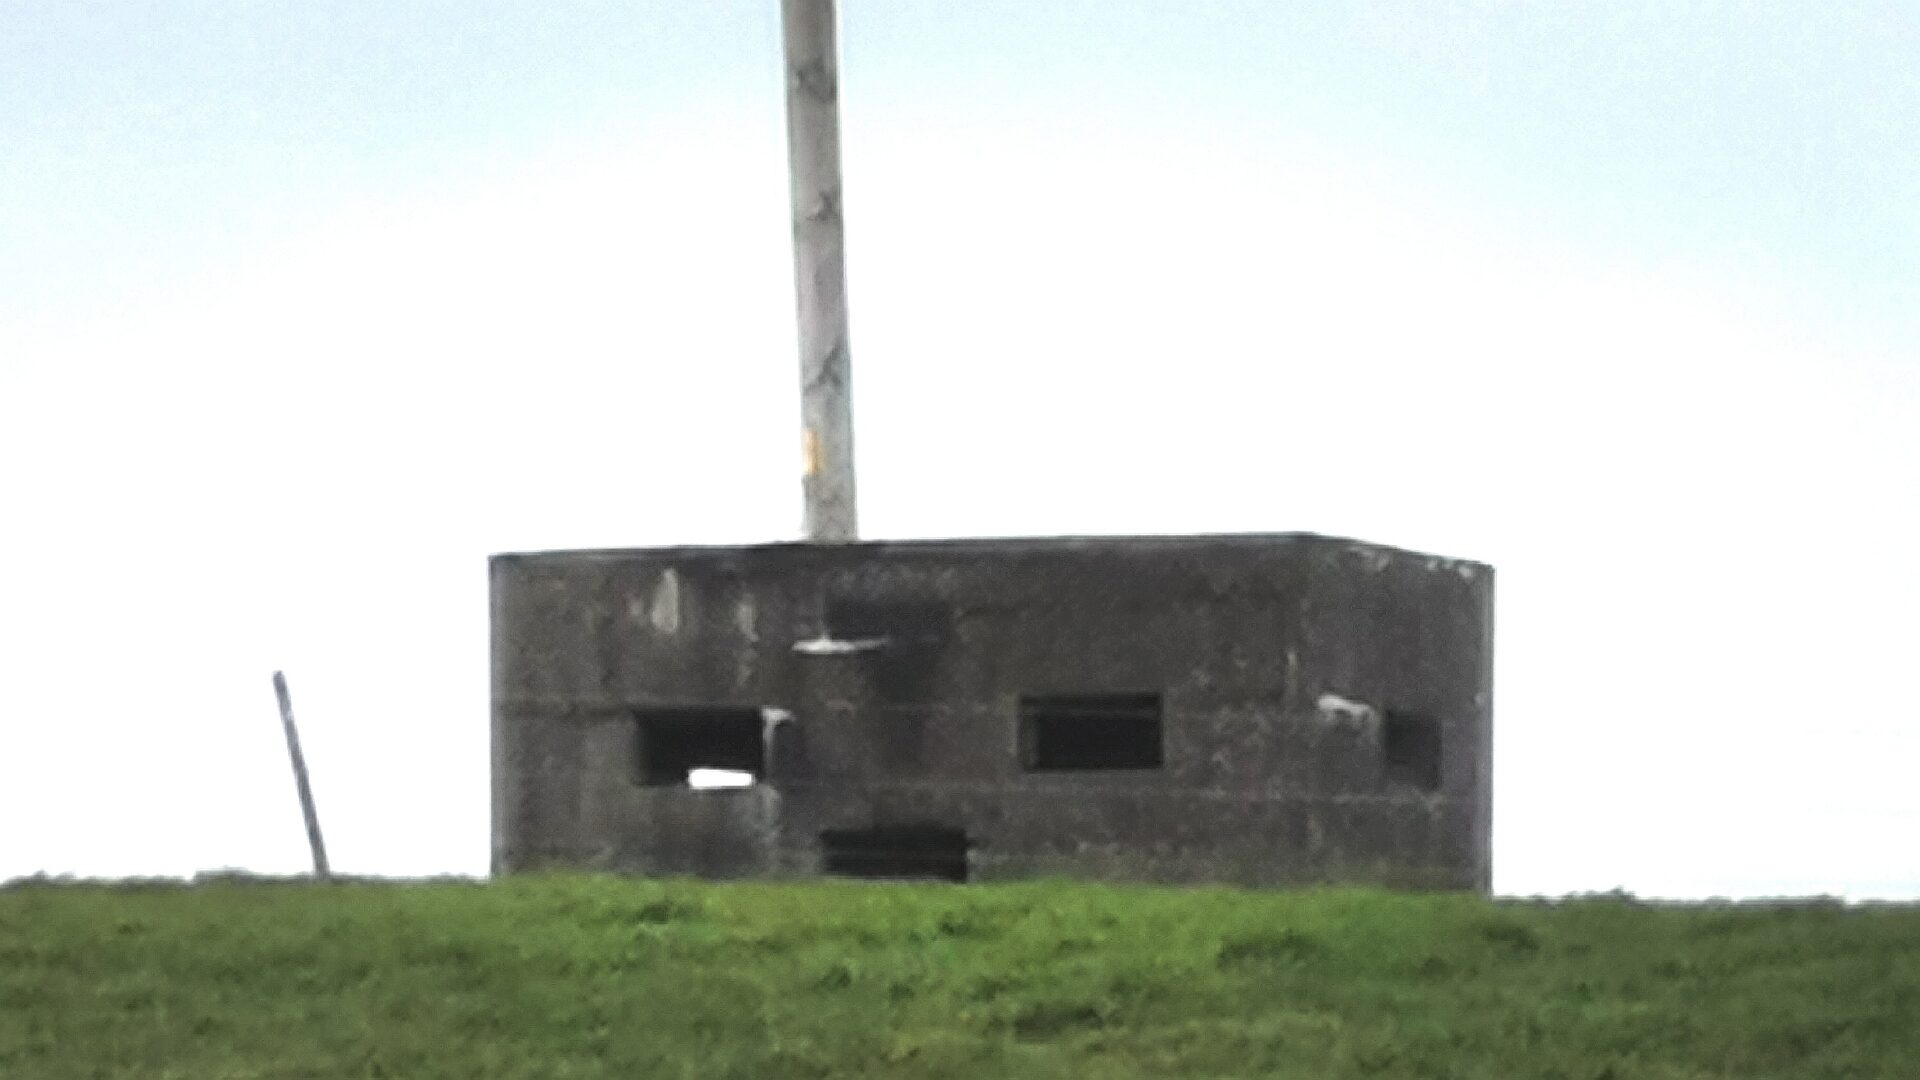 Pillbox on high ground close to Ballyvester Beach on the outskirts of Millisle, Co. Down. The pillbox faces inland forming part of a defensive stop-line.